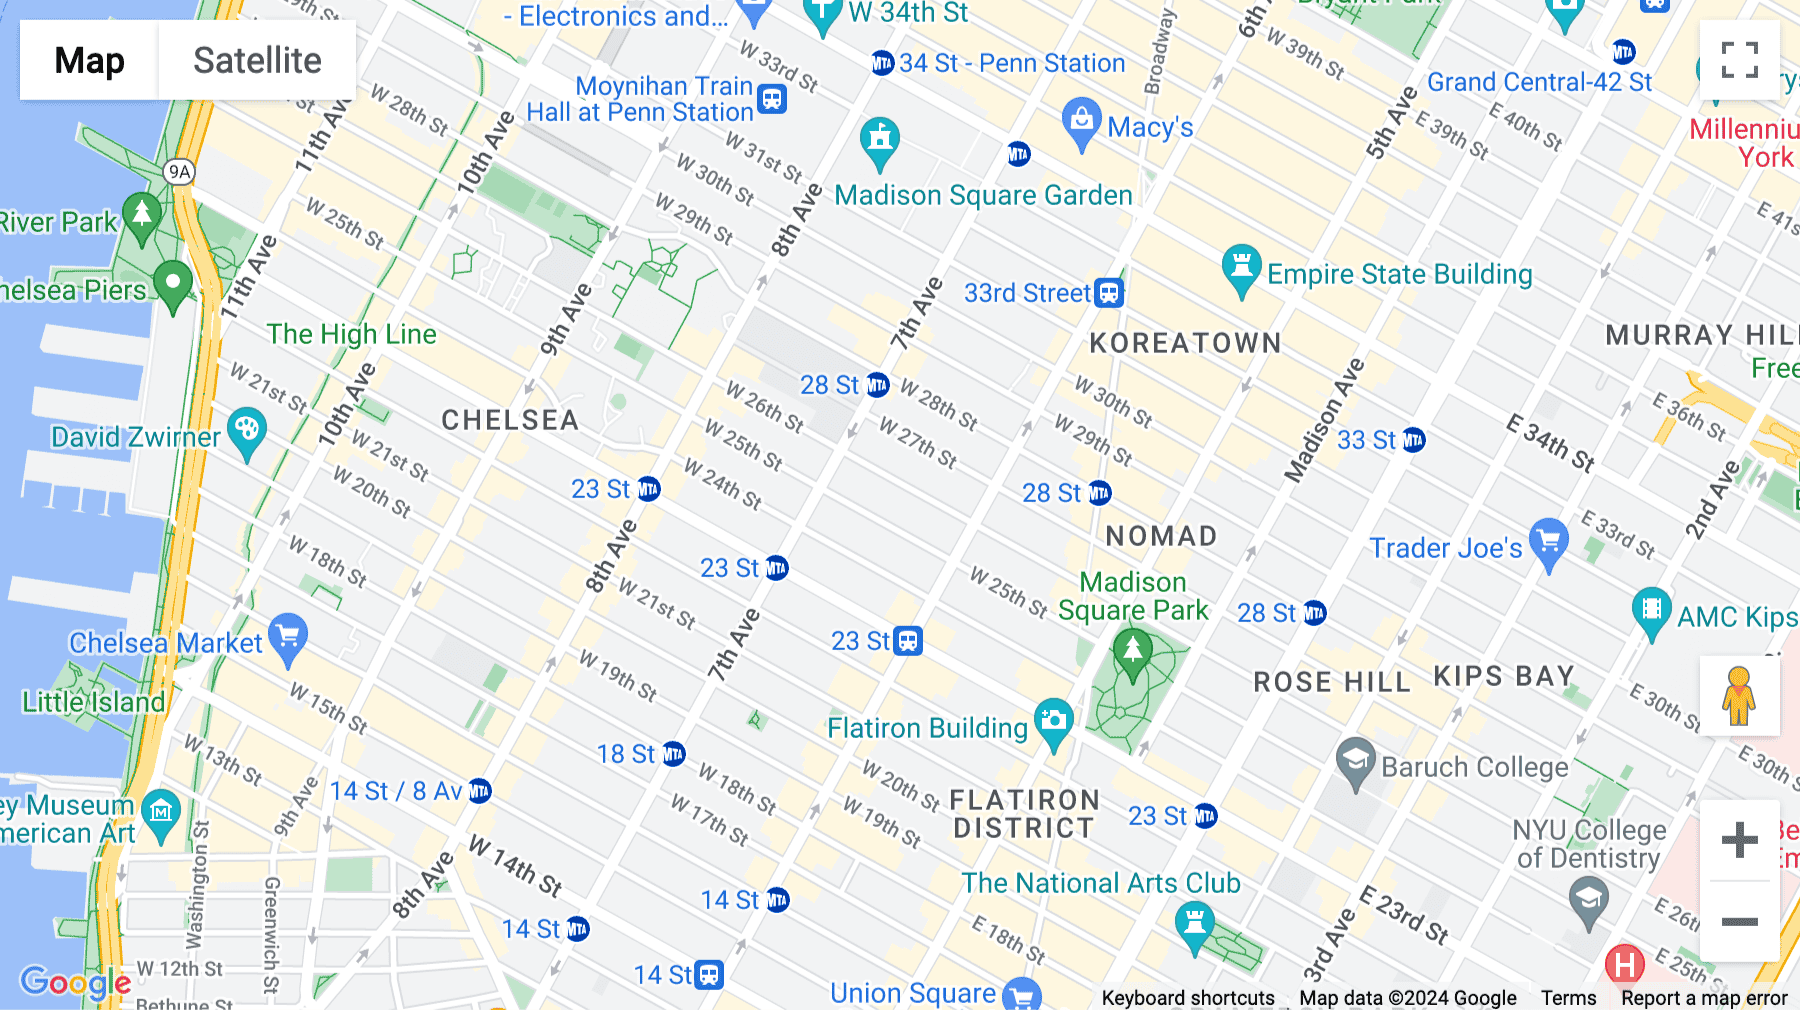 Click for interative map of 125 West 25th Street, New York City